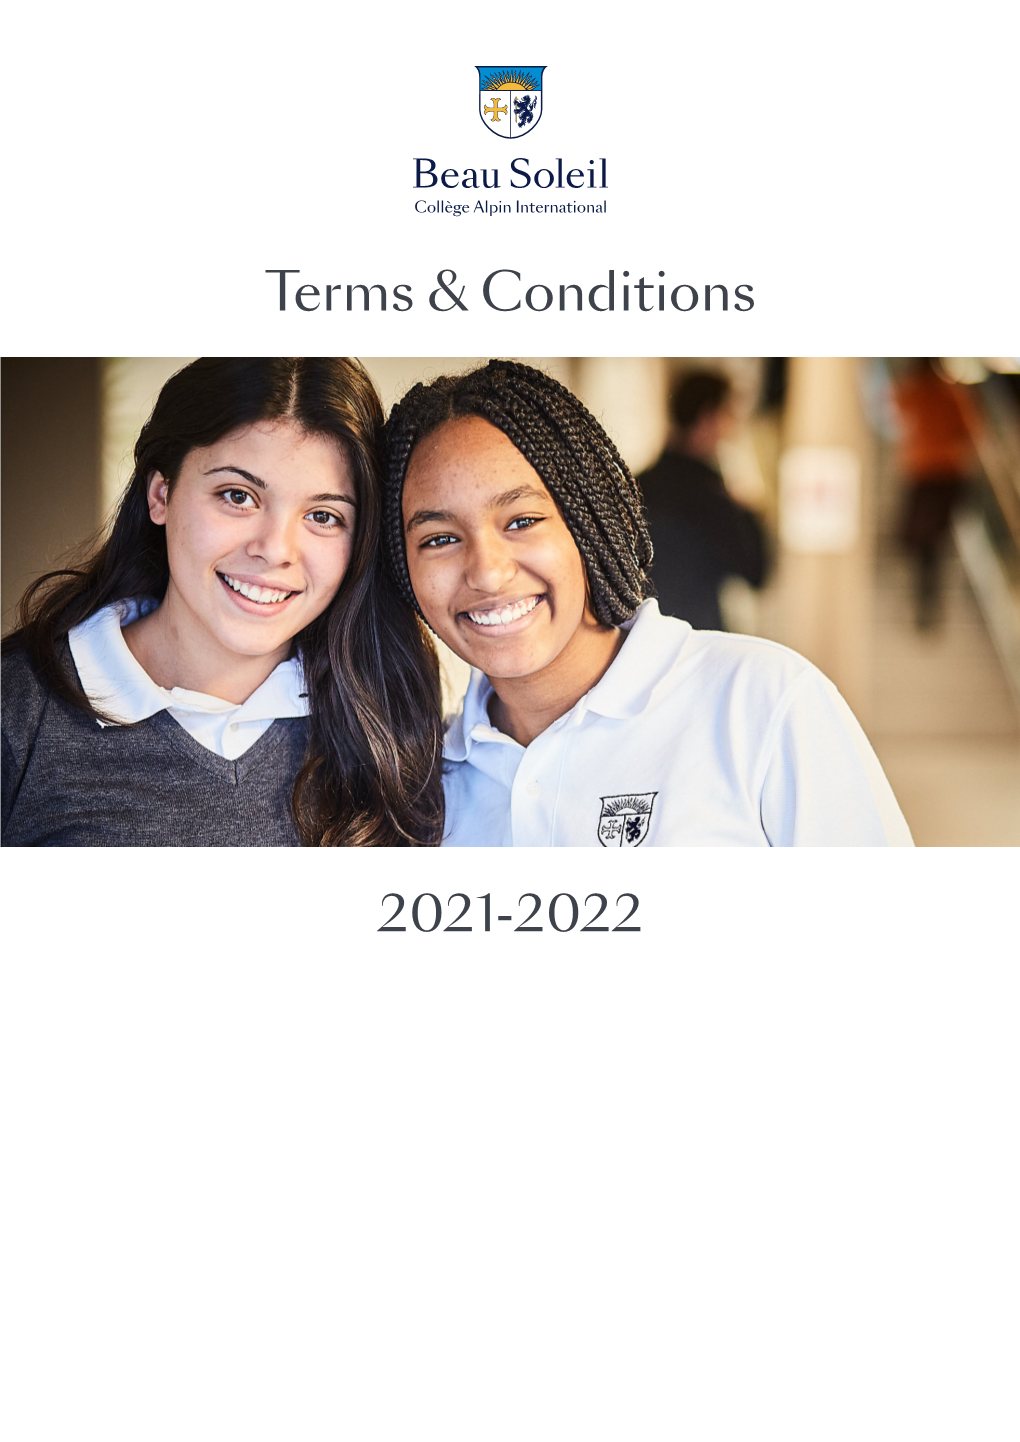 Terms & Conditions 2021-2022